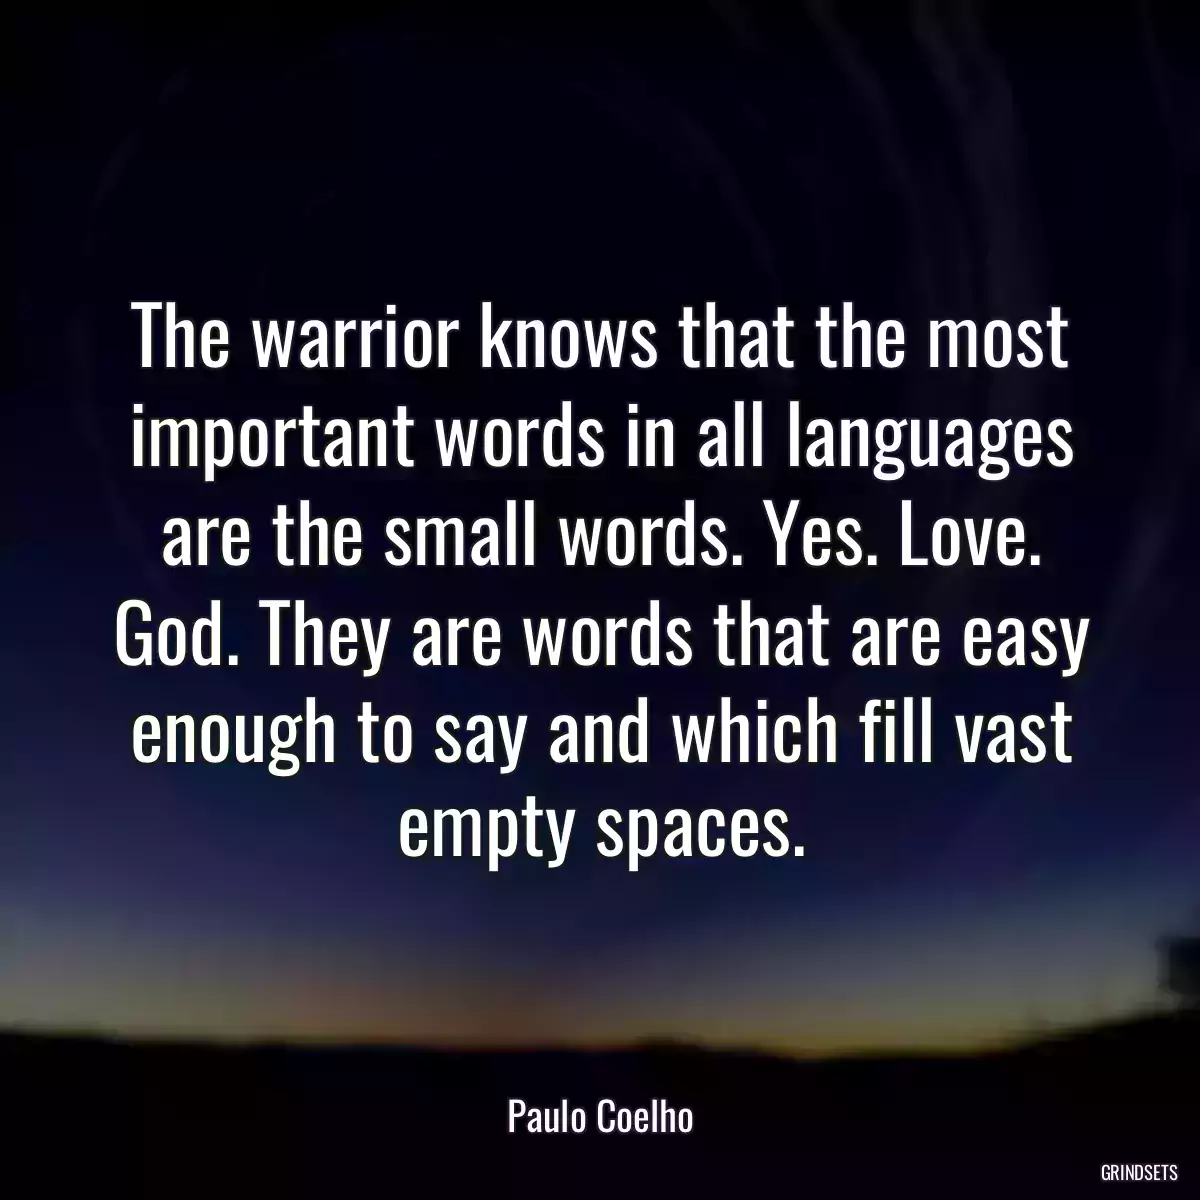 The warrior knows that the most important words in all languages are the small words. Yes. Love. God. They are words that are easy enough to say and which fill vast empty spaces.